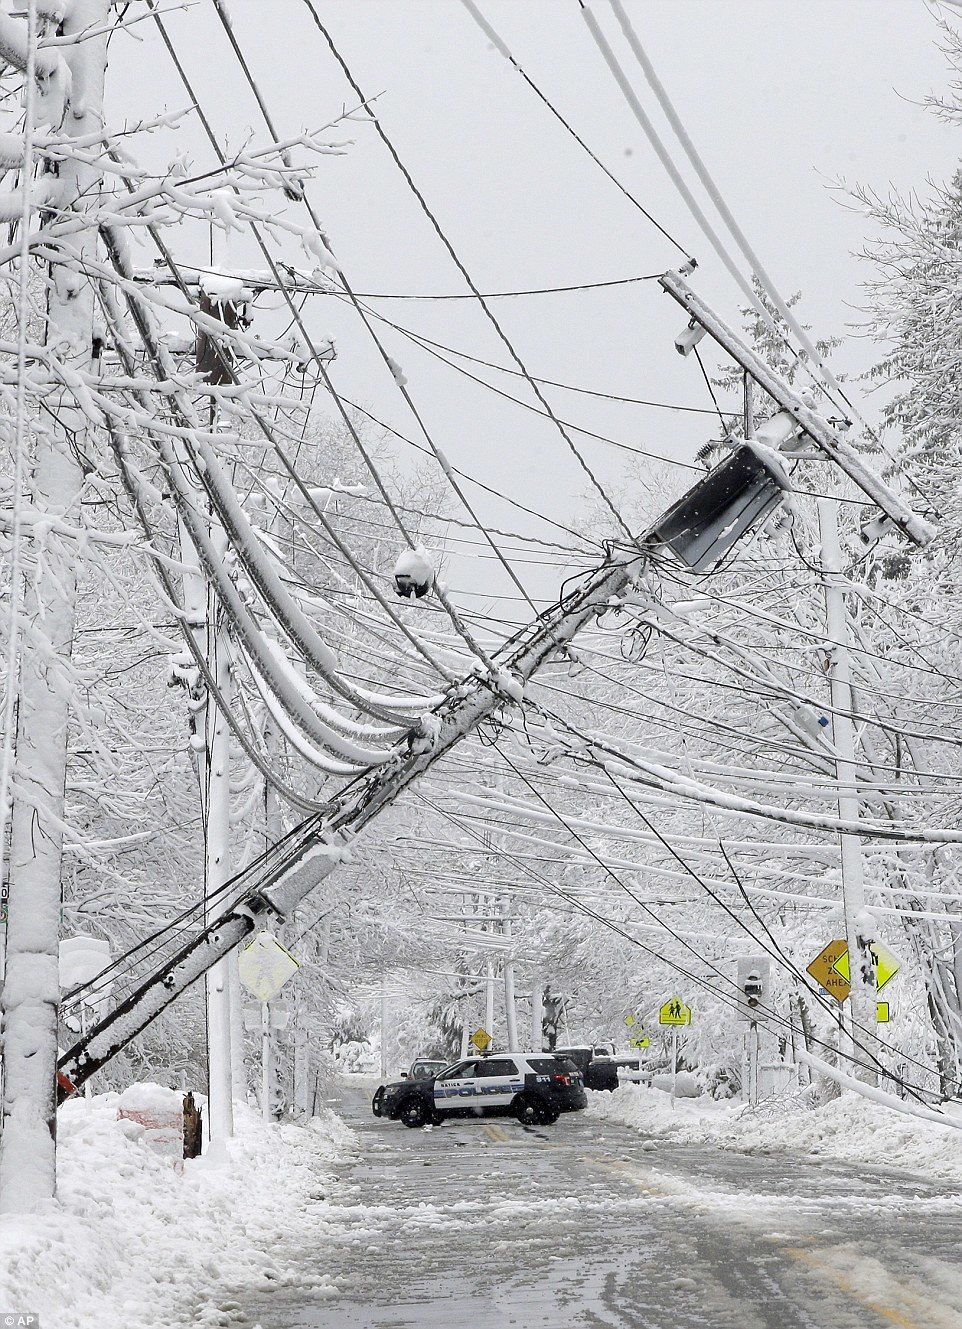 A police vehicle is pictured blocking off a road near dozens of downed power lines in Matic, Massachusetts, after the second storm in a week knocked out power for dozens in the town